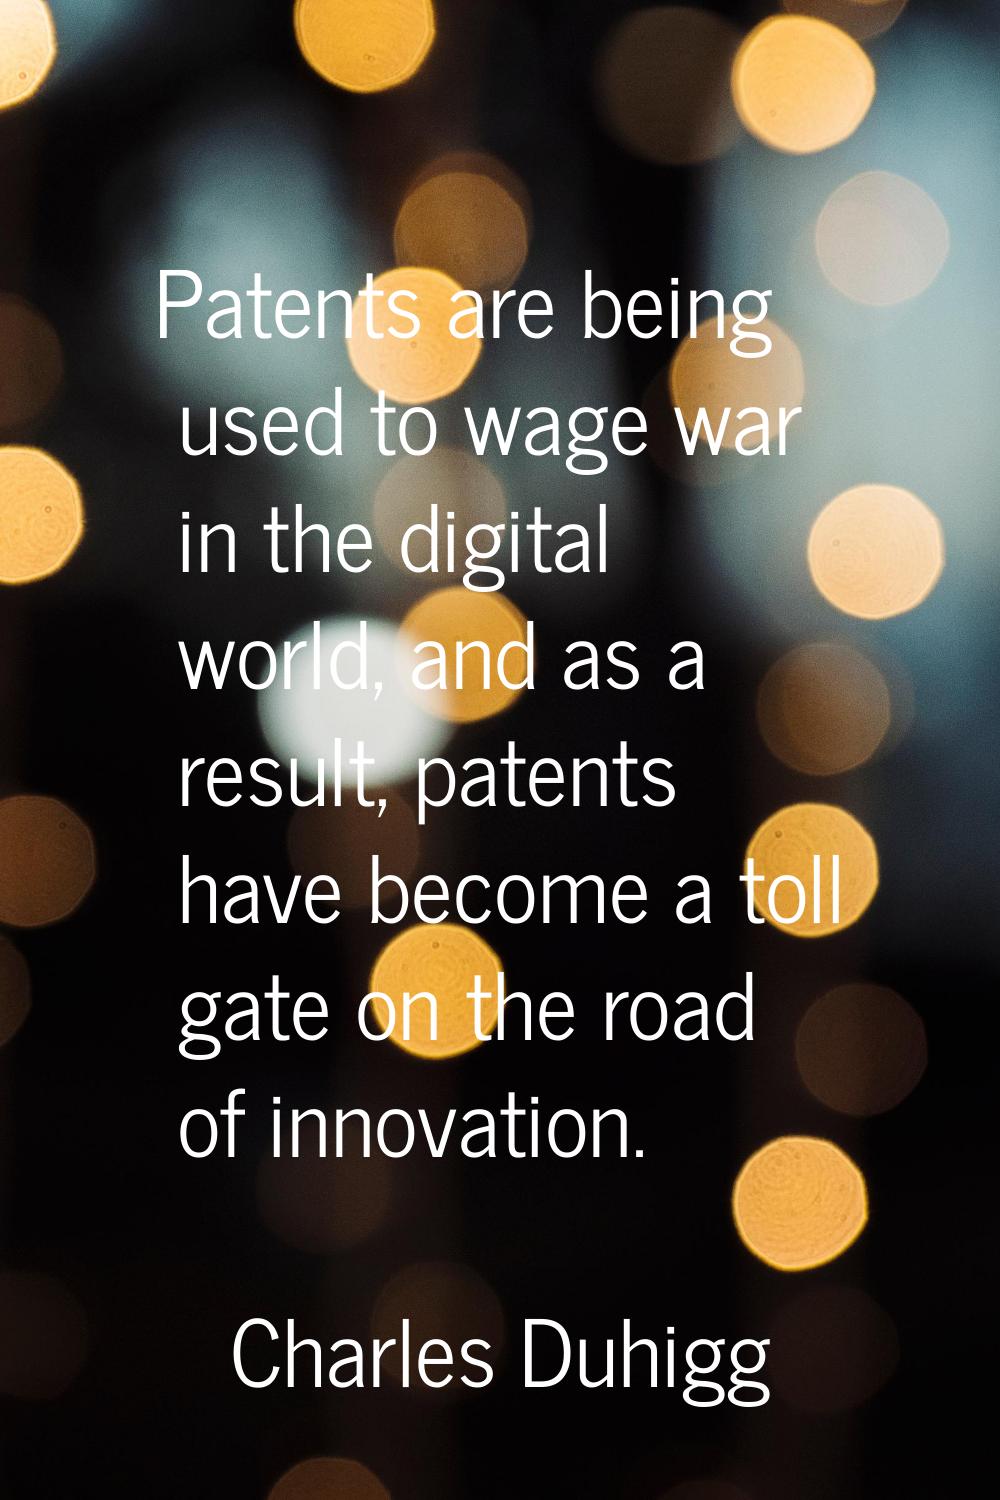 Patents are being used to wage war in the digital world, and as a result, patents have become a tol